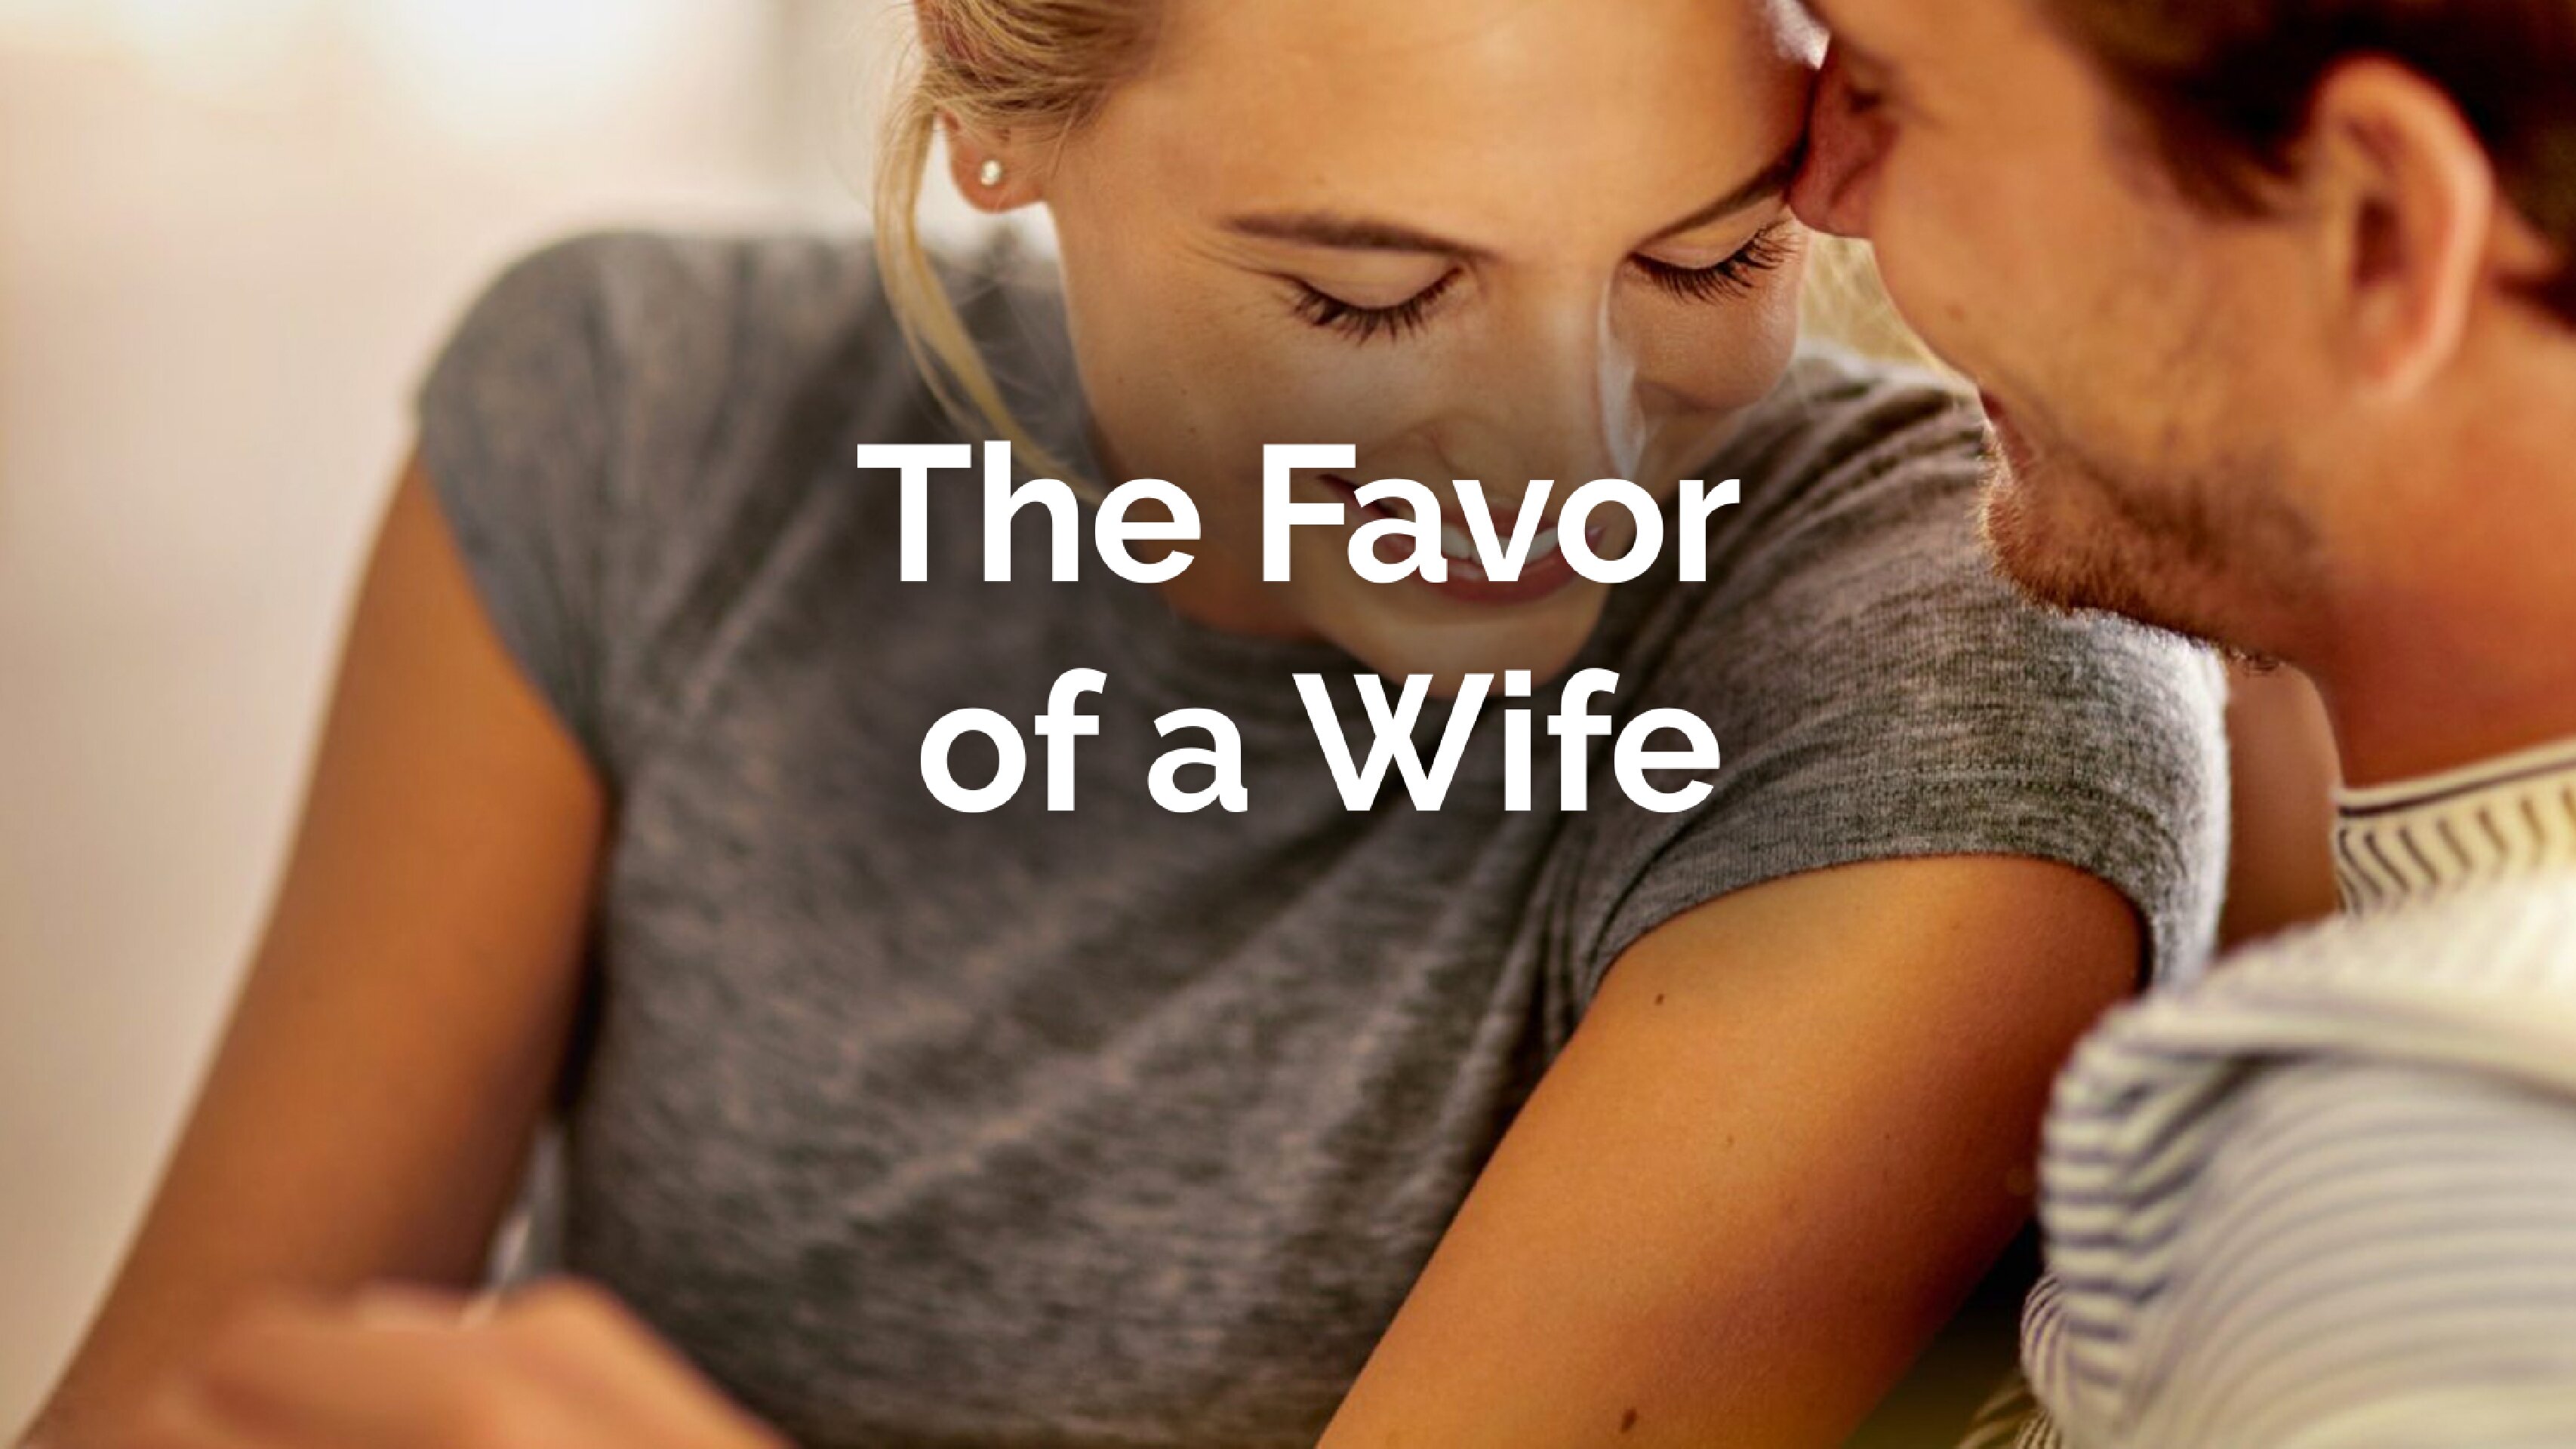 The Favor of a Wife